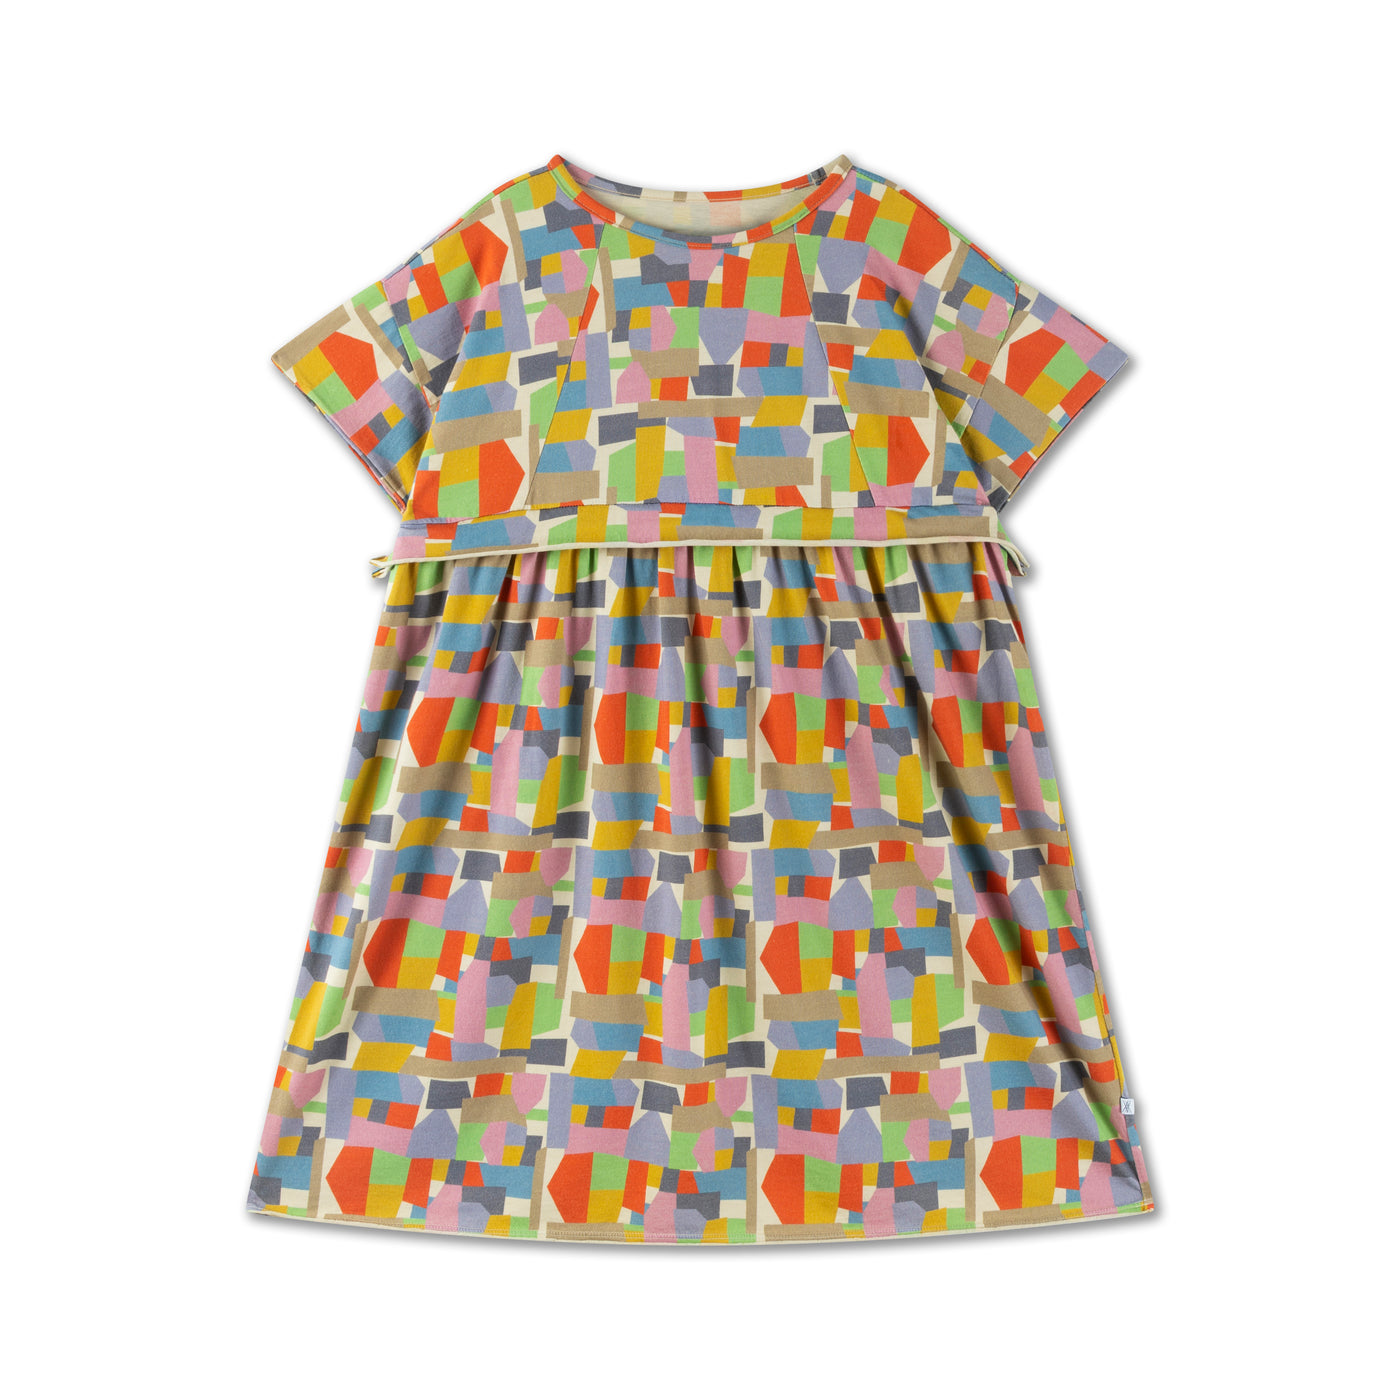 dress of clouds - graphic color block